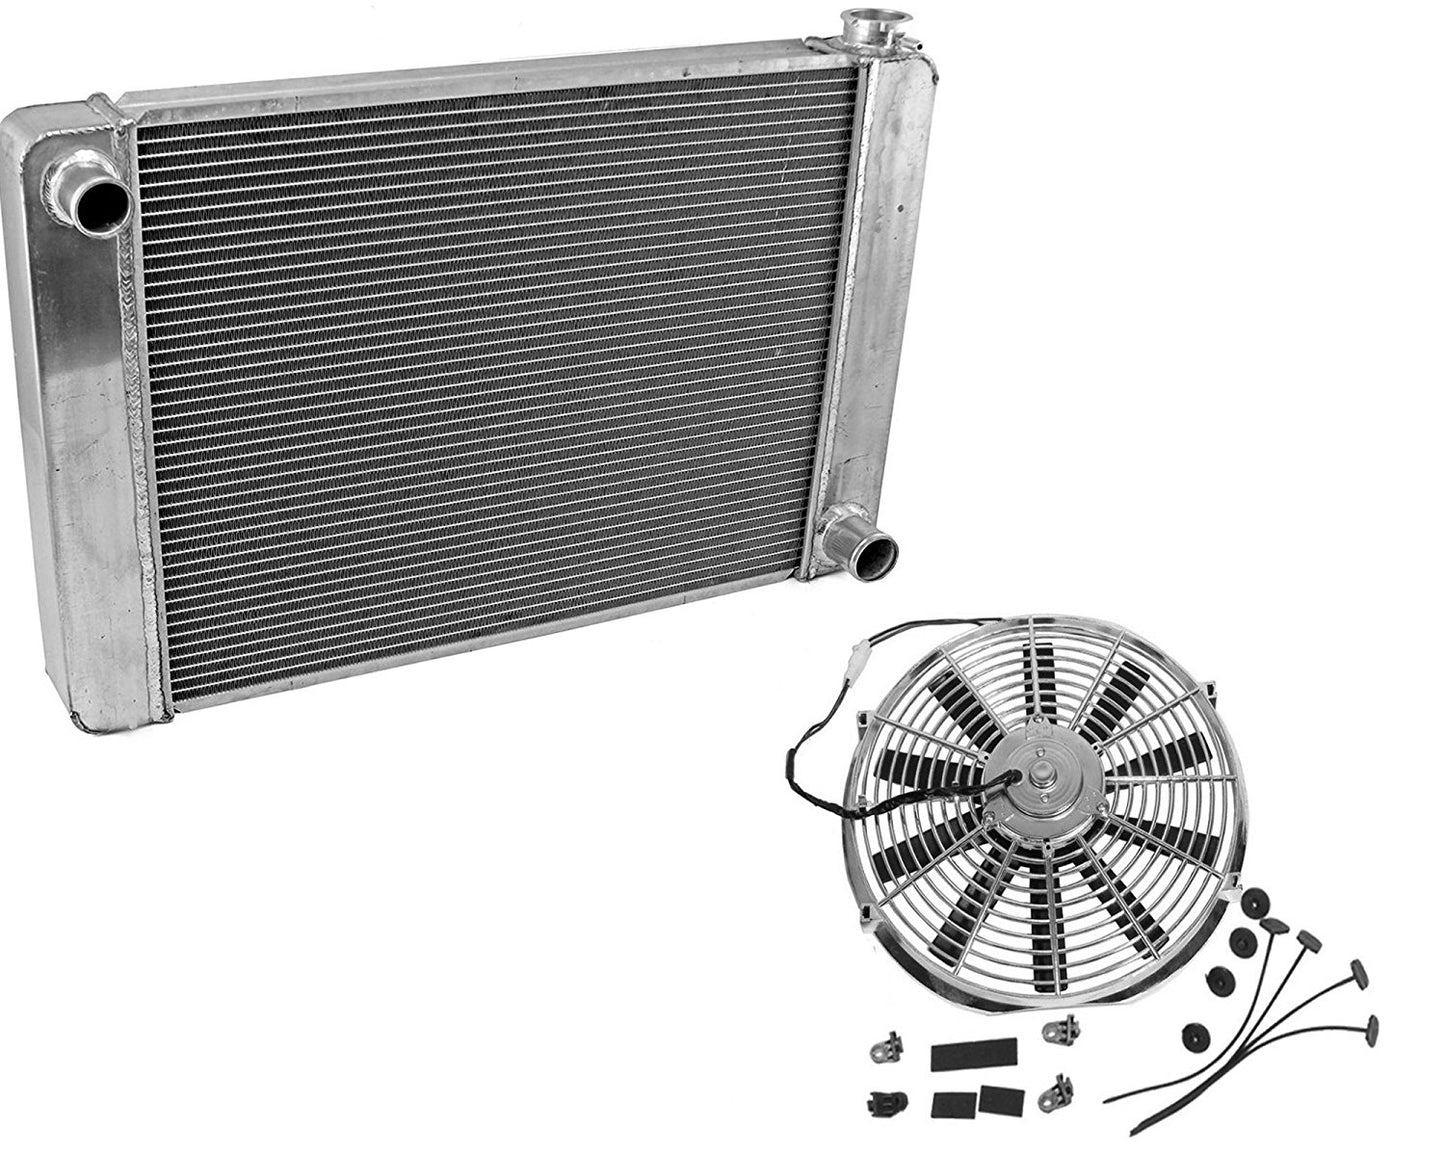 Fabricated Aluminum Radiator 31" x 19" x3" Overall For SBC BBC Chevy GM & 16" Chrome Straight Blade Reversible Cooling radiator Fan